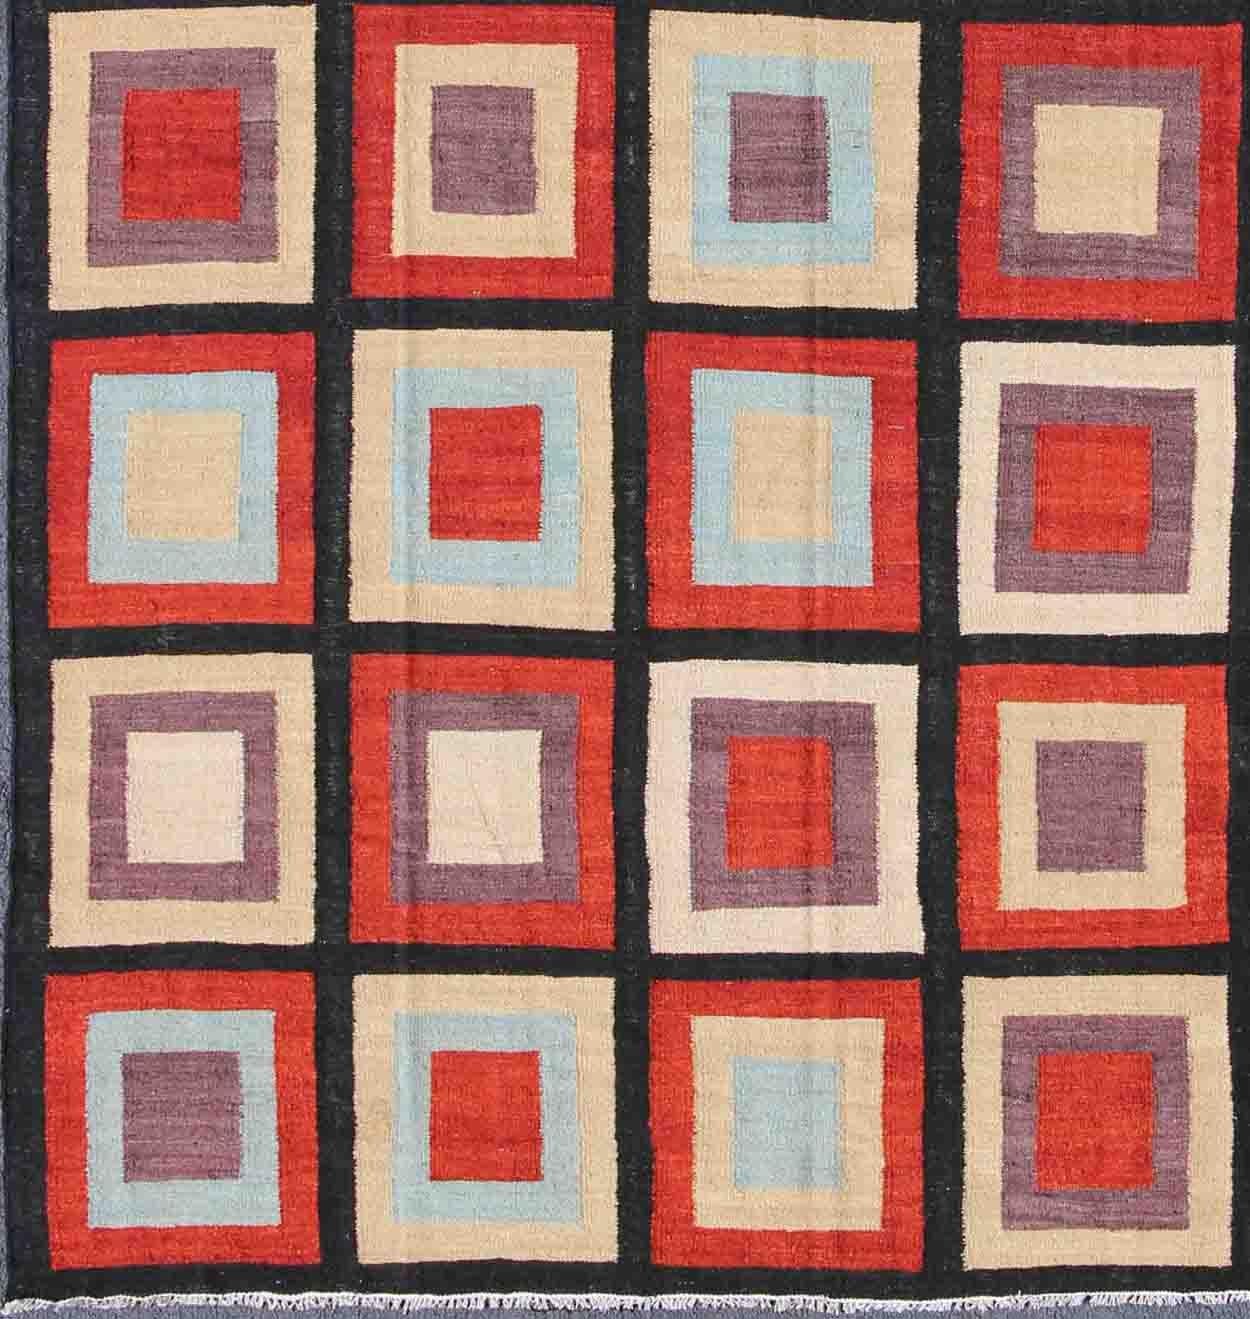 Afghanistan made Kilim Rug with multicolored boxed design in red, blue, cream, purple, rug mp-888, country of origin / type: Afghanistan / Kilim, circa 1980

This vibrant Afghan Kilim rug displays a large checkerboard design of boxed shapes.